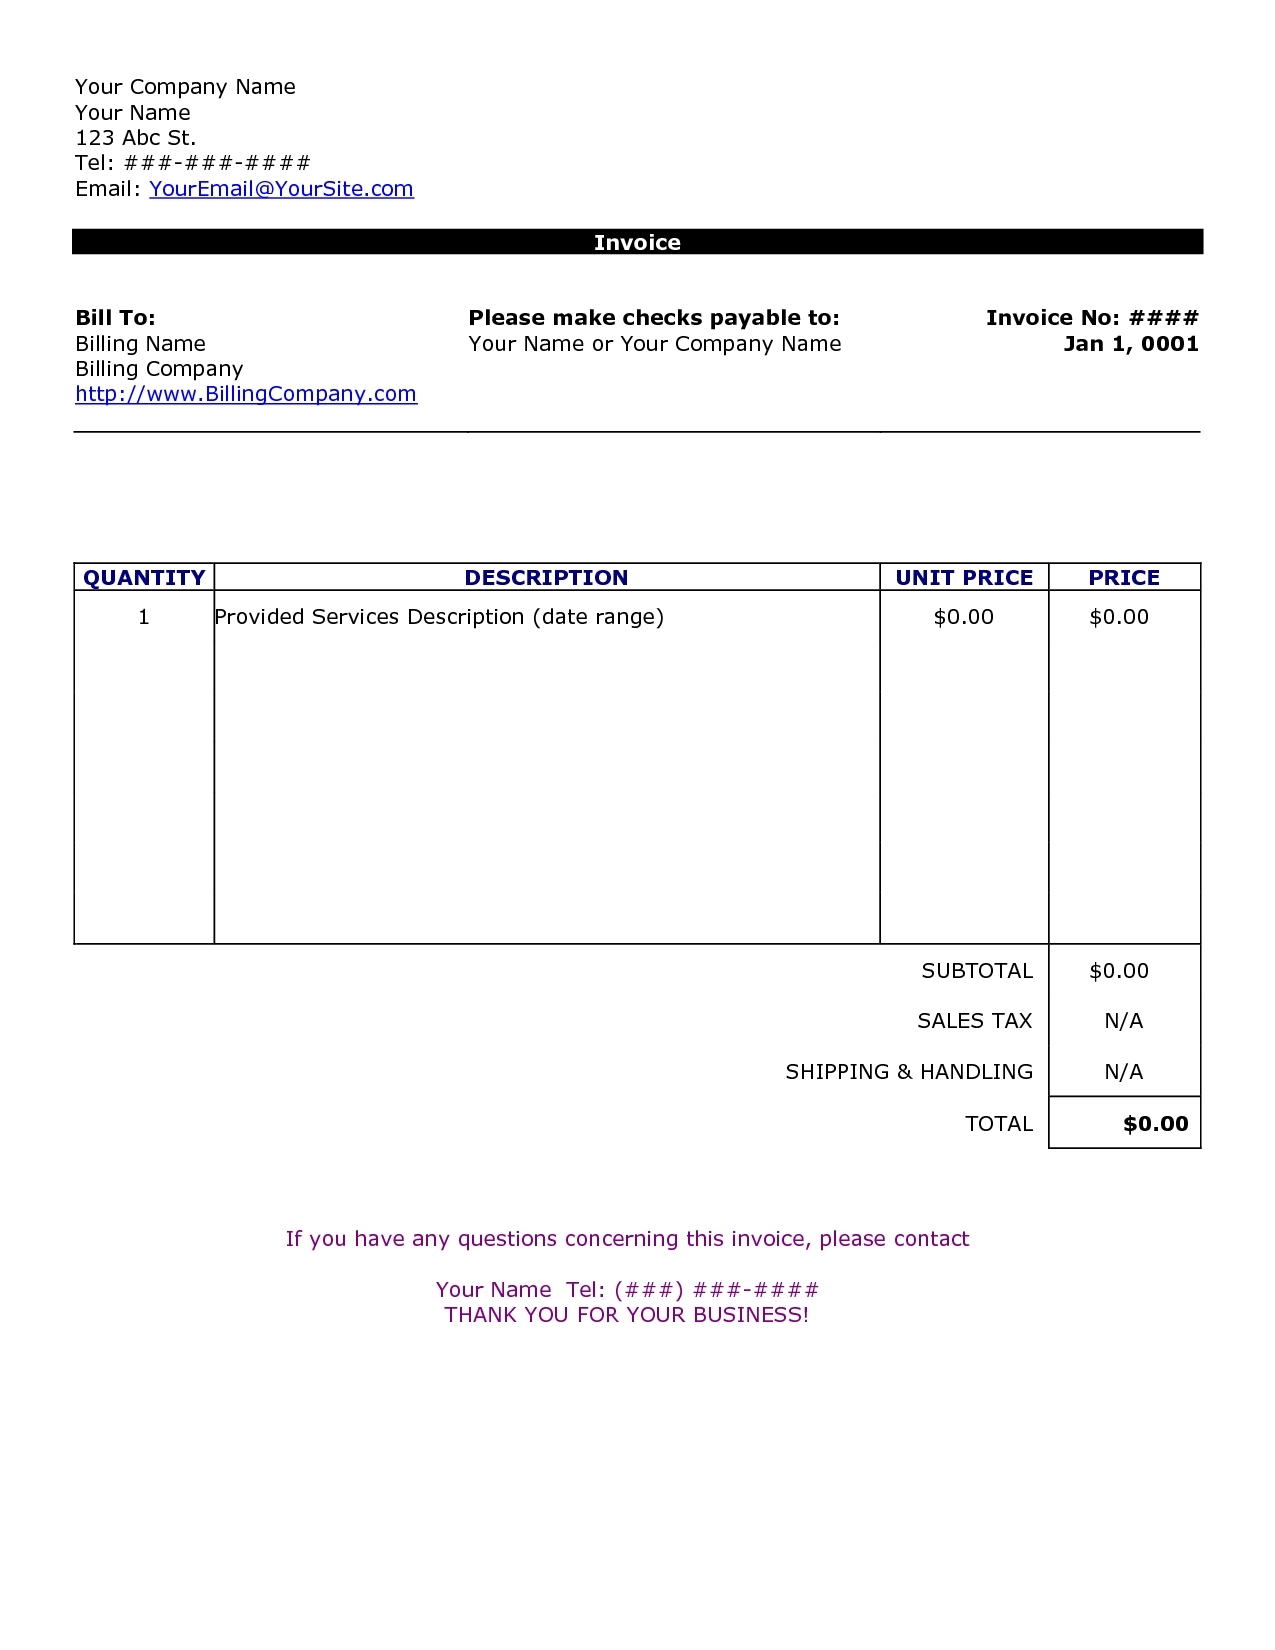 word document invoice template blank invoice doc 2016wwwmahtaweb create an invoice in word